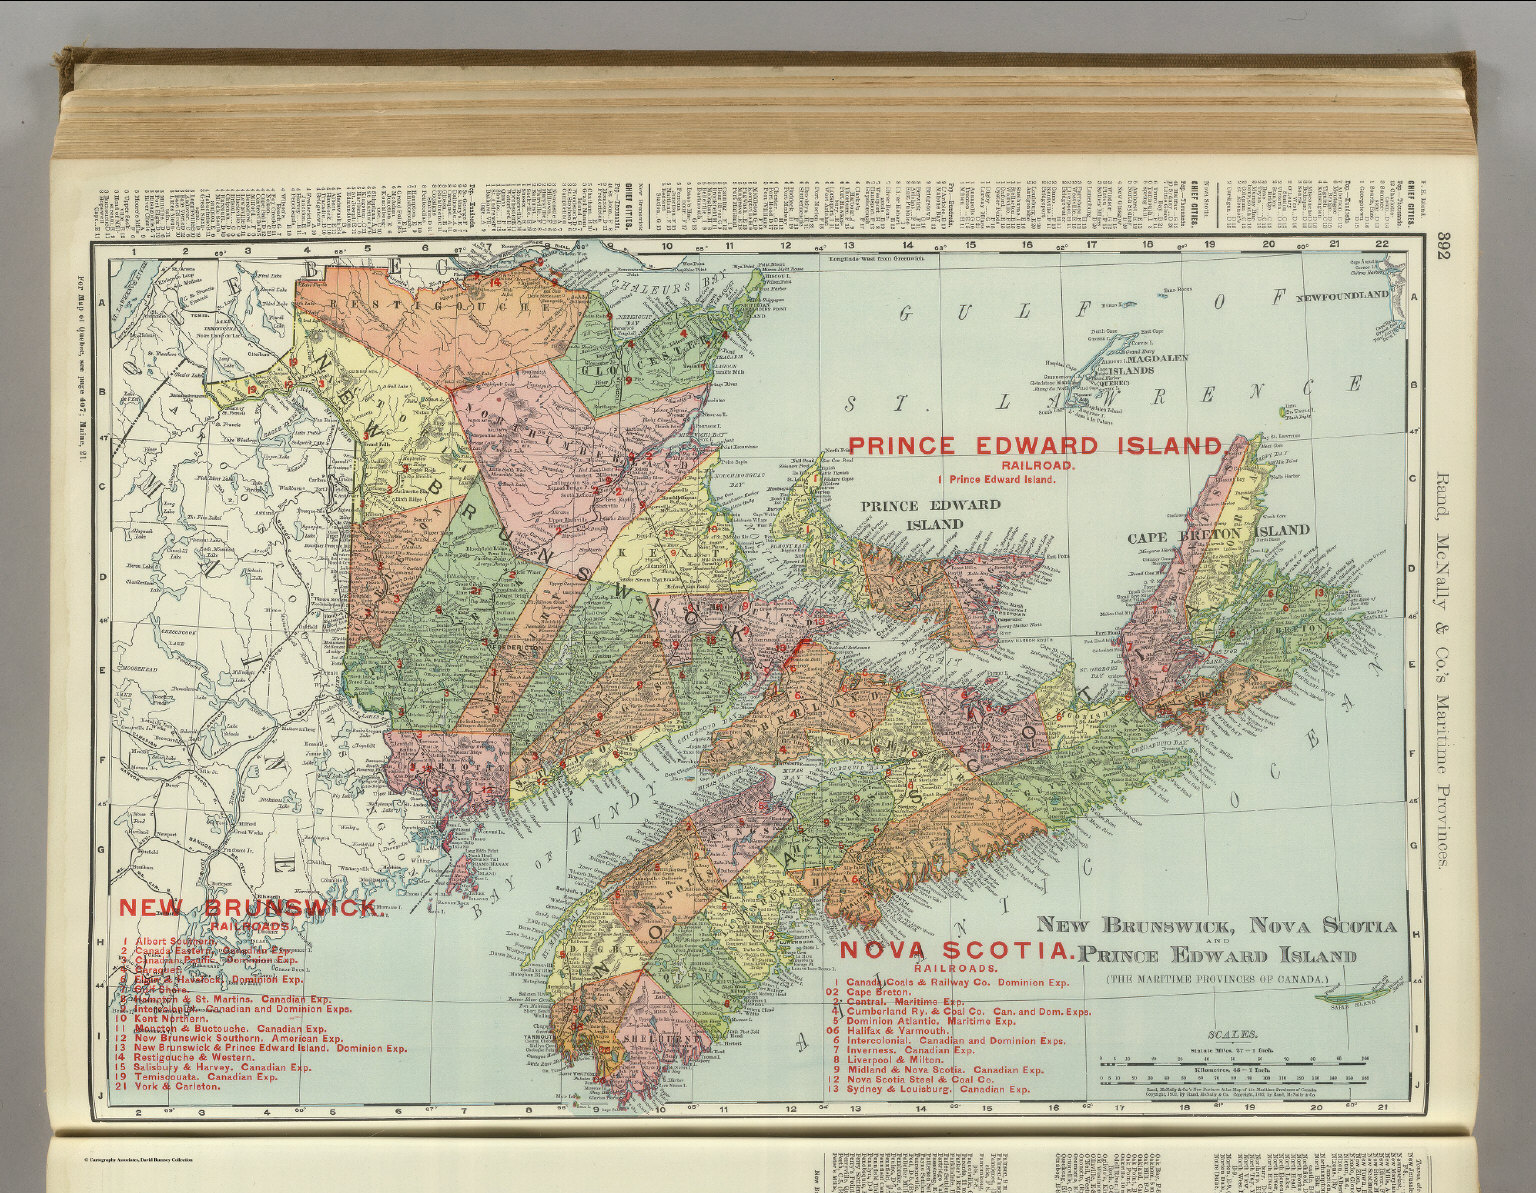 Maritime Provinces. - David Rumsey Historical Map Collection